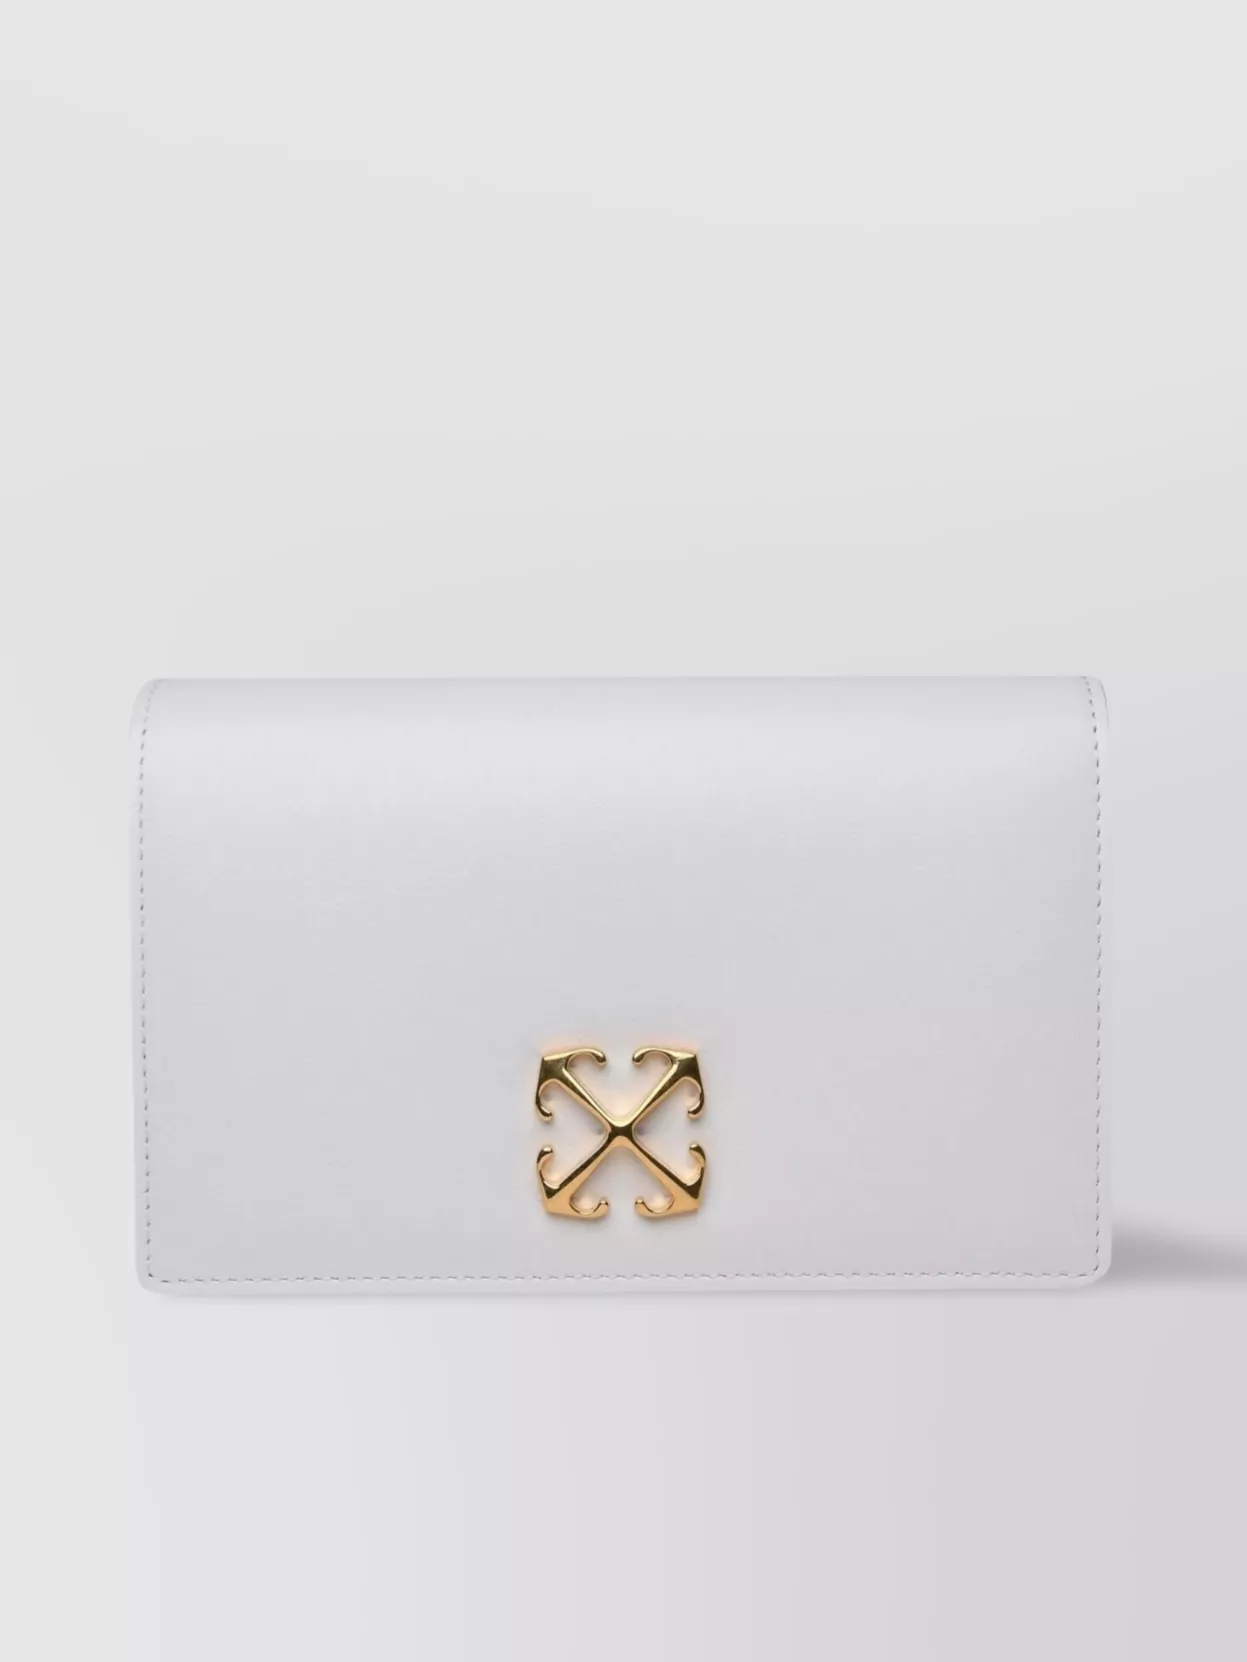 Off-white Leather Clutch Bag Chain Strap